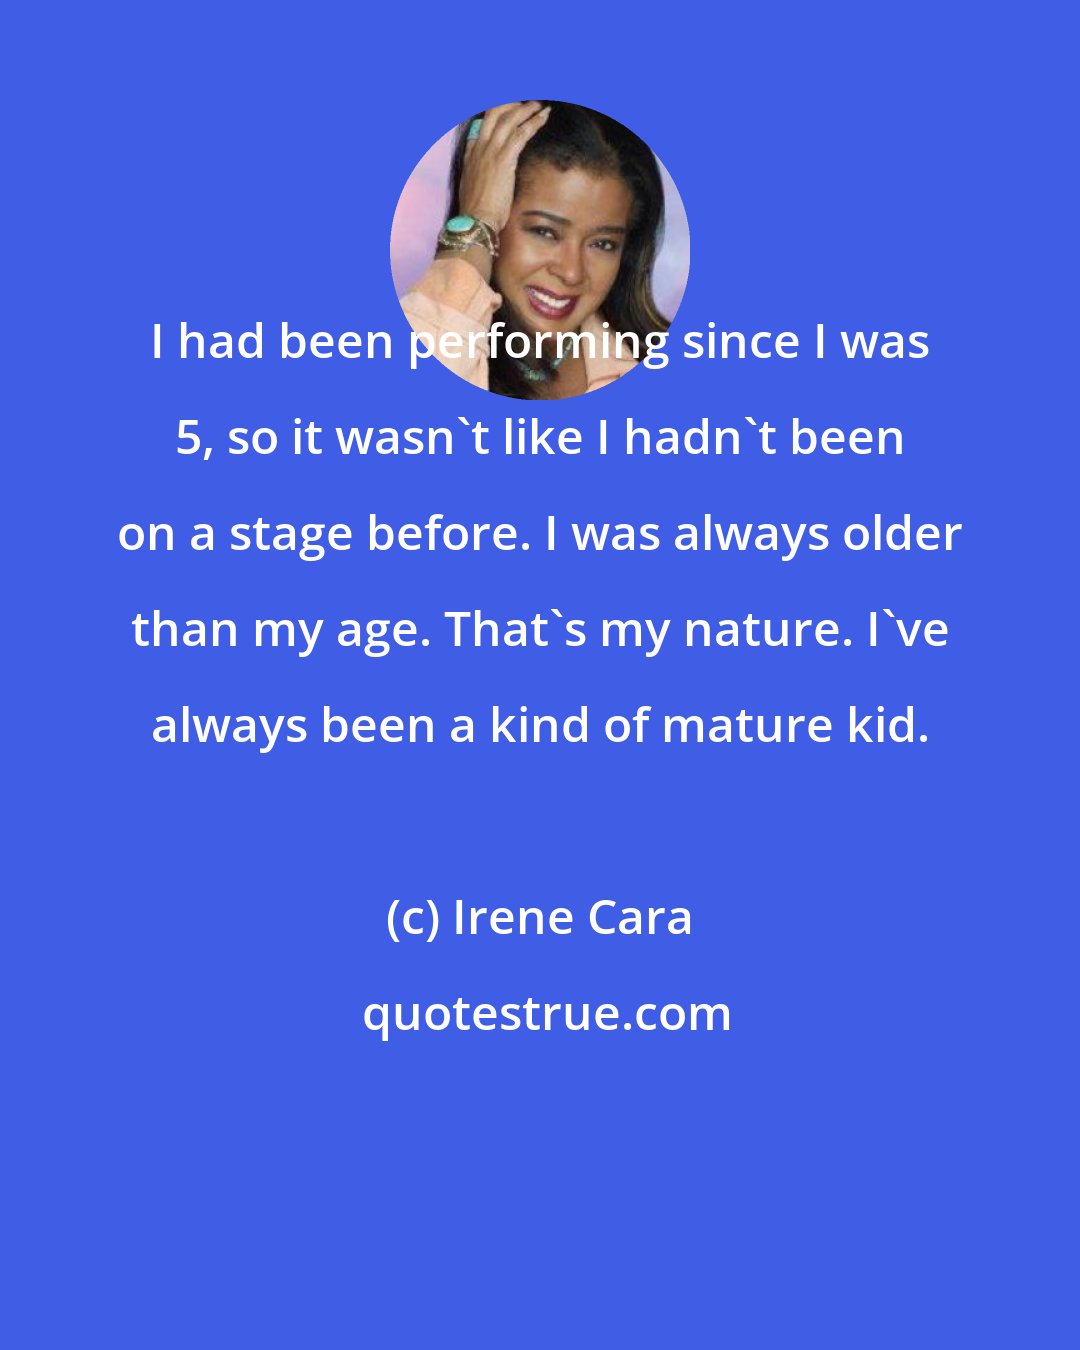 Irene Cara: I had been performing since I was 5, so it wasn't like I hadn't been on a stage before. I was always older than my age. That's my nature. I've always been a kind of mature kid.